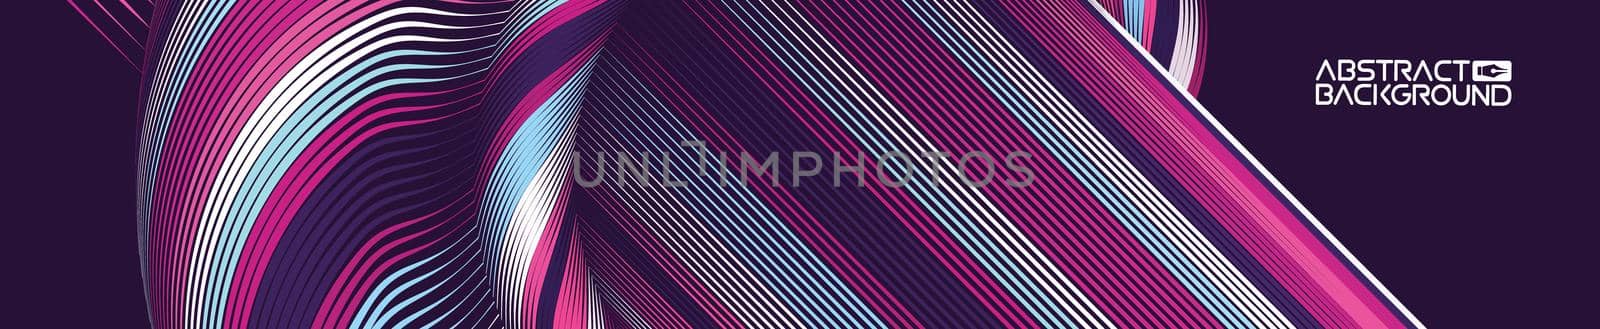 Abstract art backdrop. Colorful curly circle. Futuristic waves wallpaper with folds. Purple background .